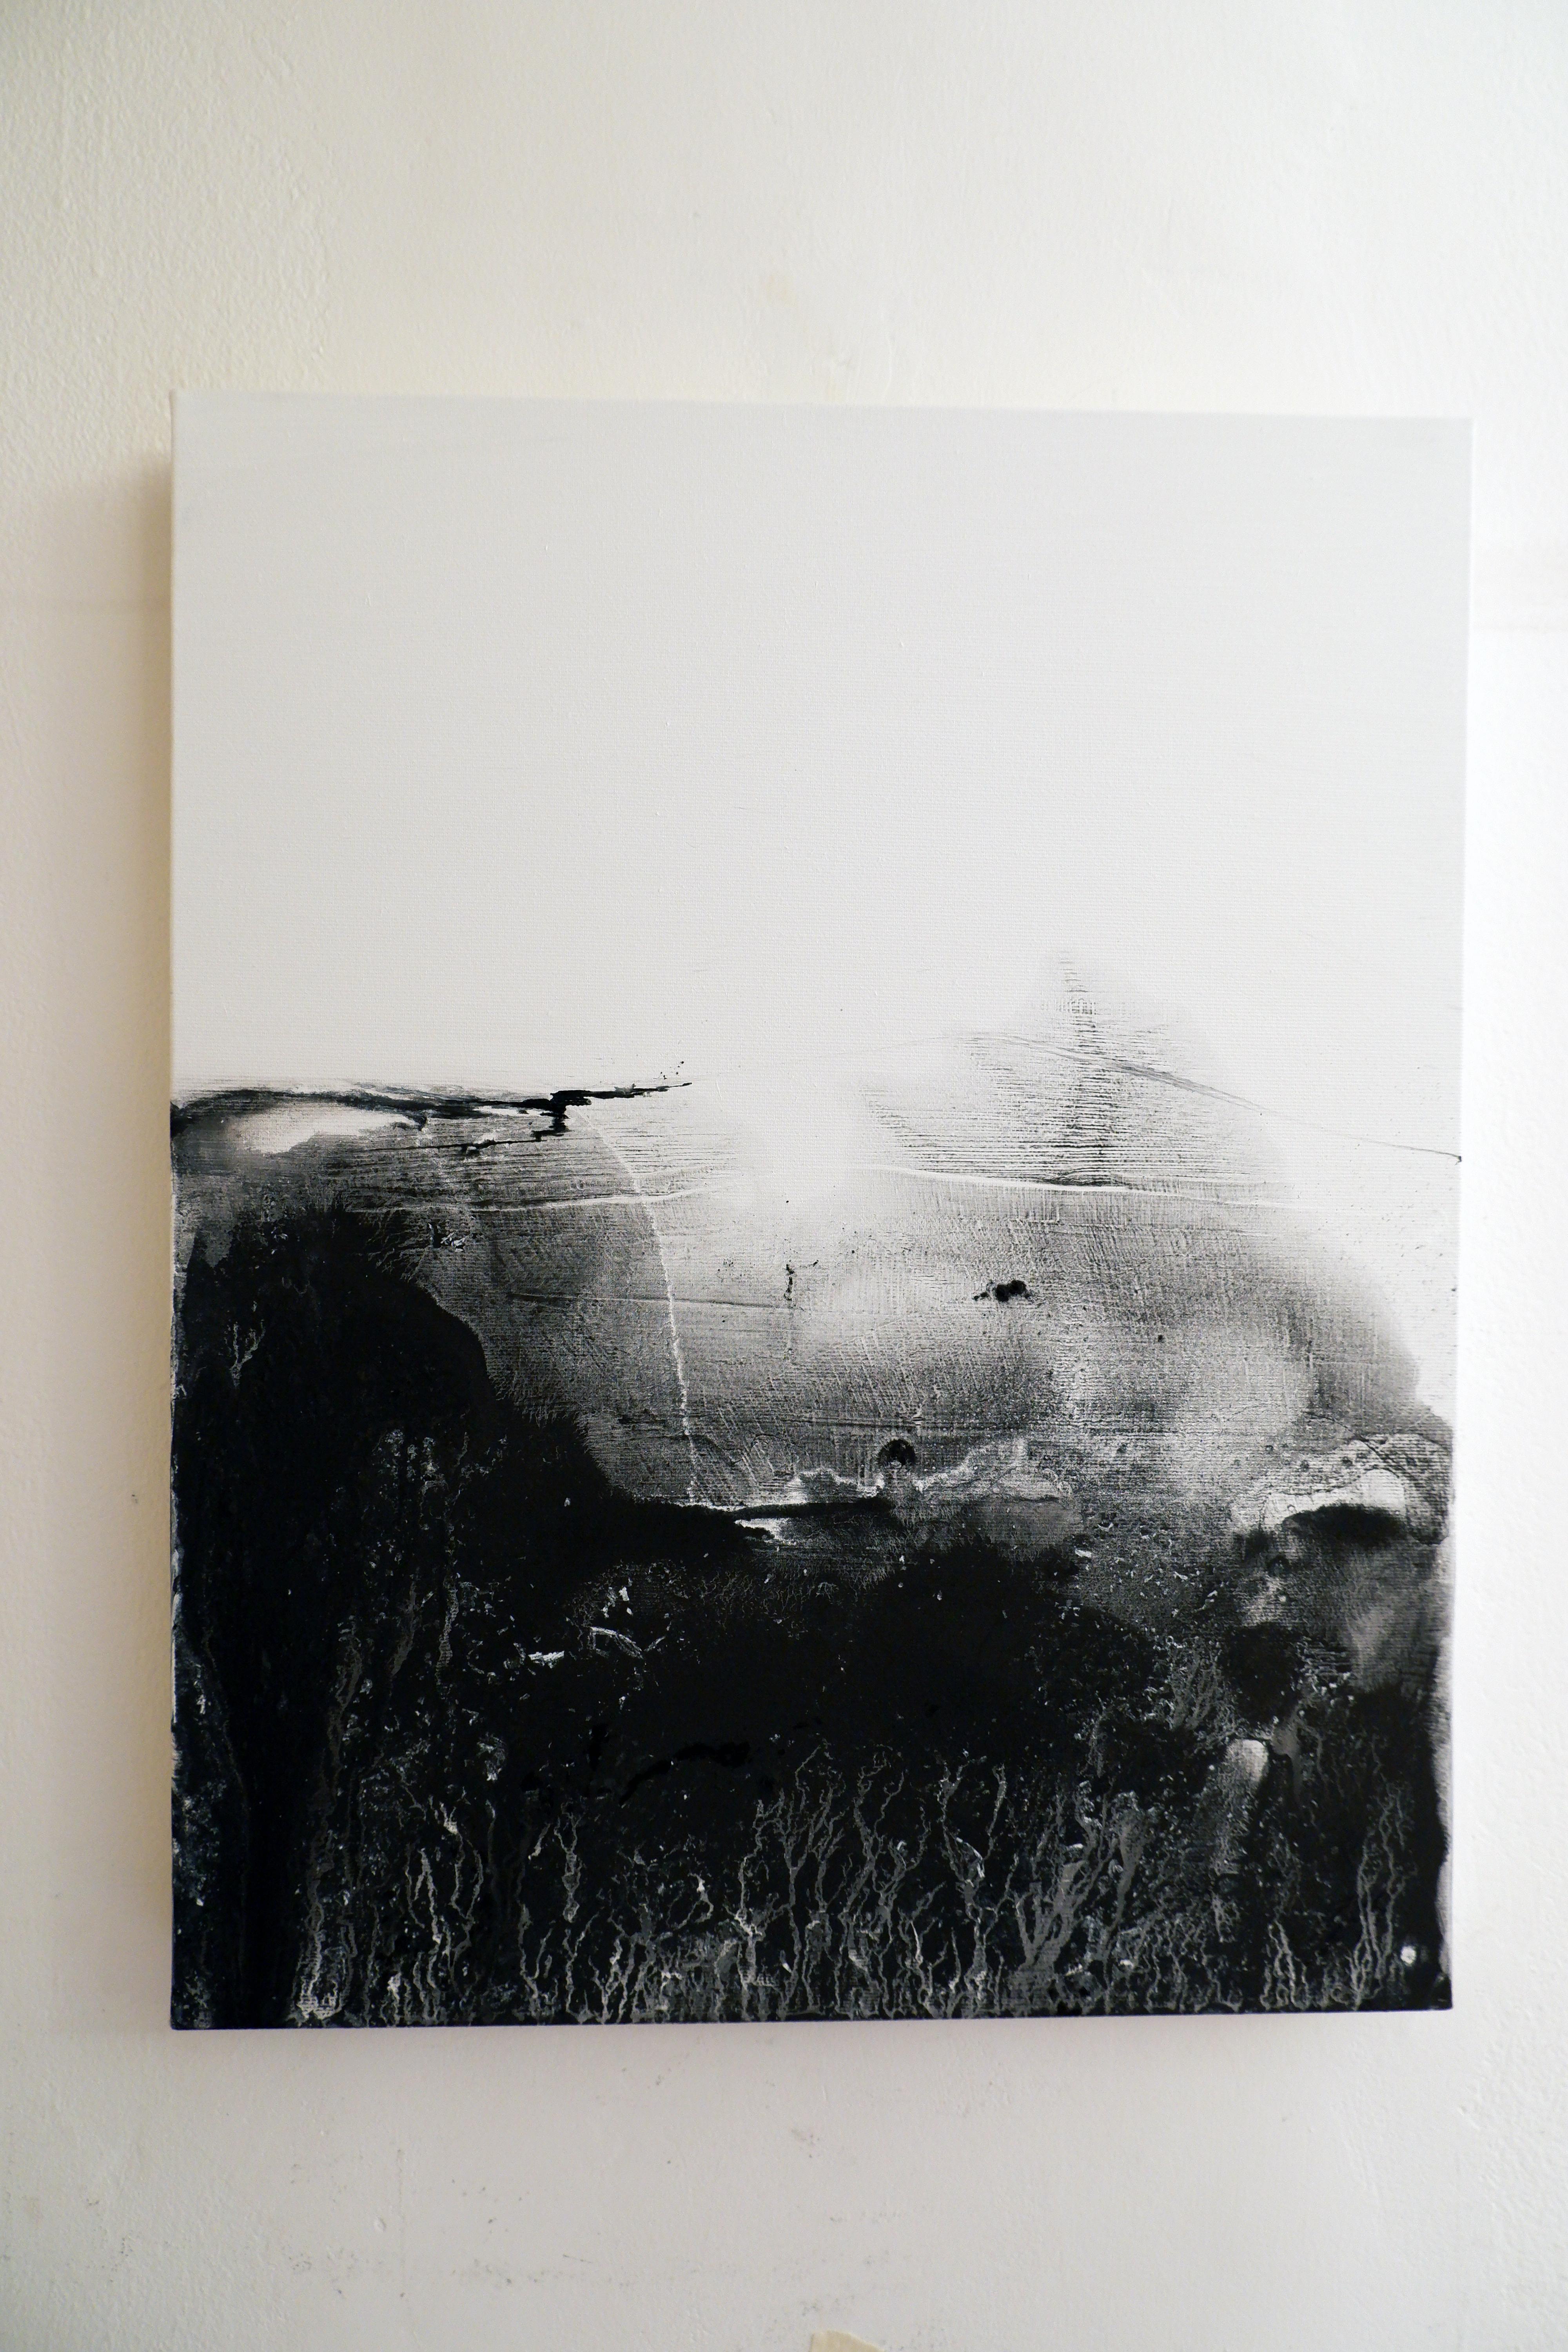 LANDSCAPE B/W
MINERAL OXIDE ON CANVAS
40x50 cm
2020
original artwork

Subjects:Landscape
Materials:Canvas
Styles:#Abstract #Abstract #ExpressionismExpressionism #Minimalism #Figurative

Marilina Marchica, born in 1984, was born in Agrigento, where